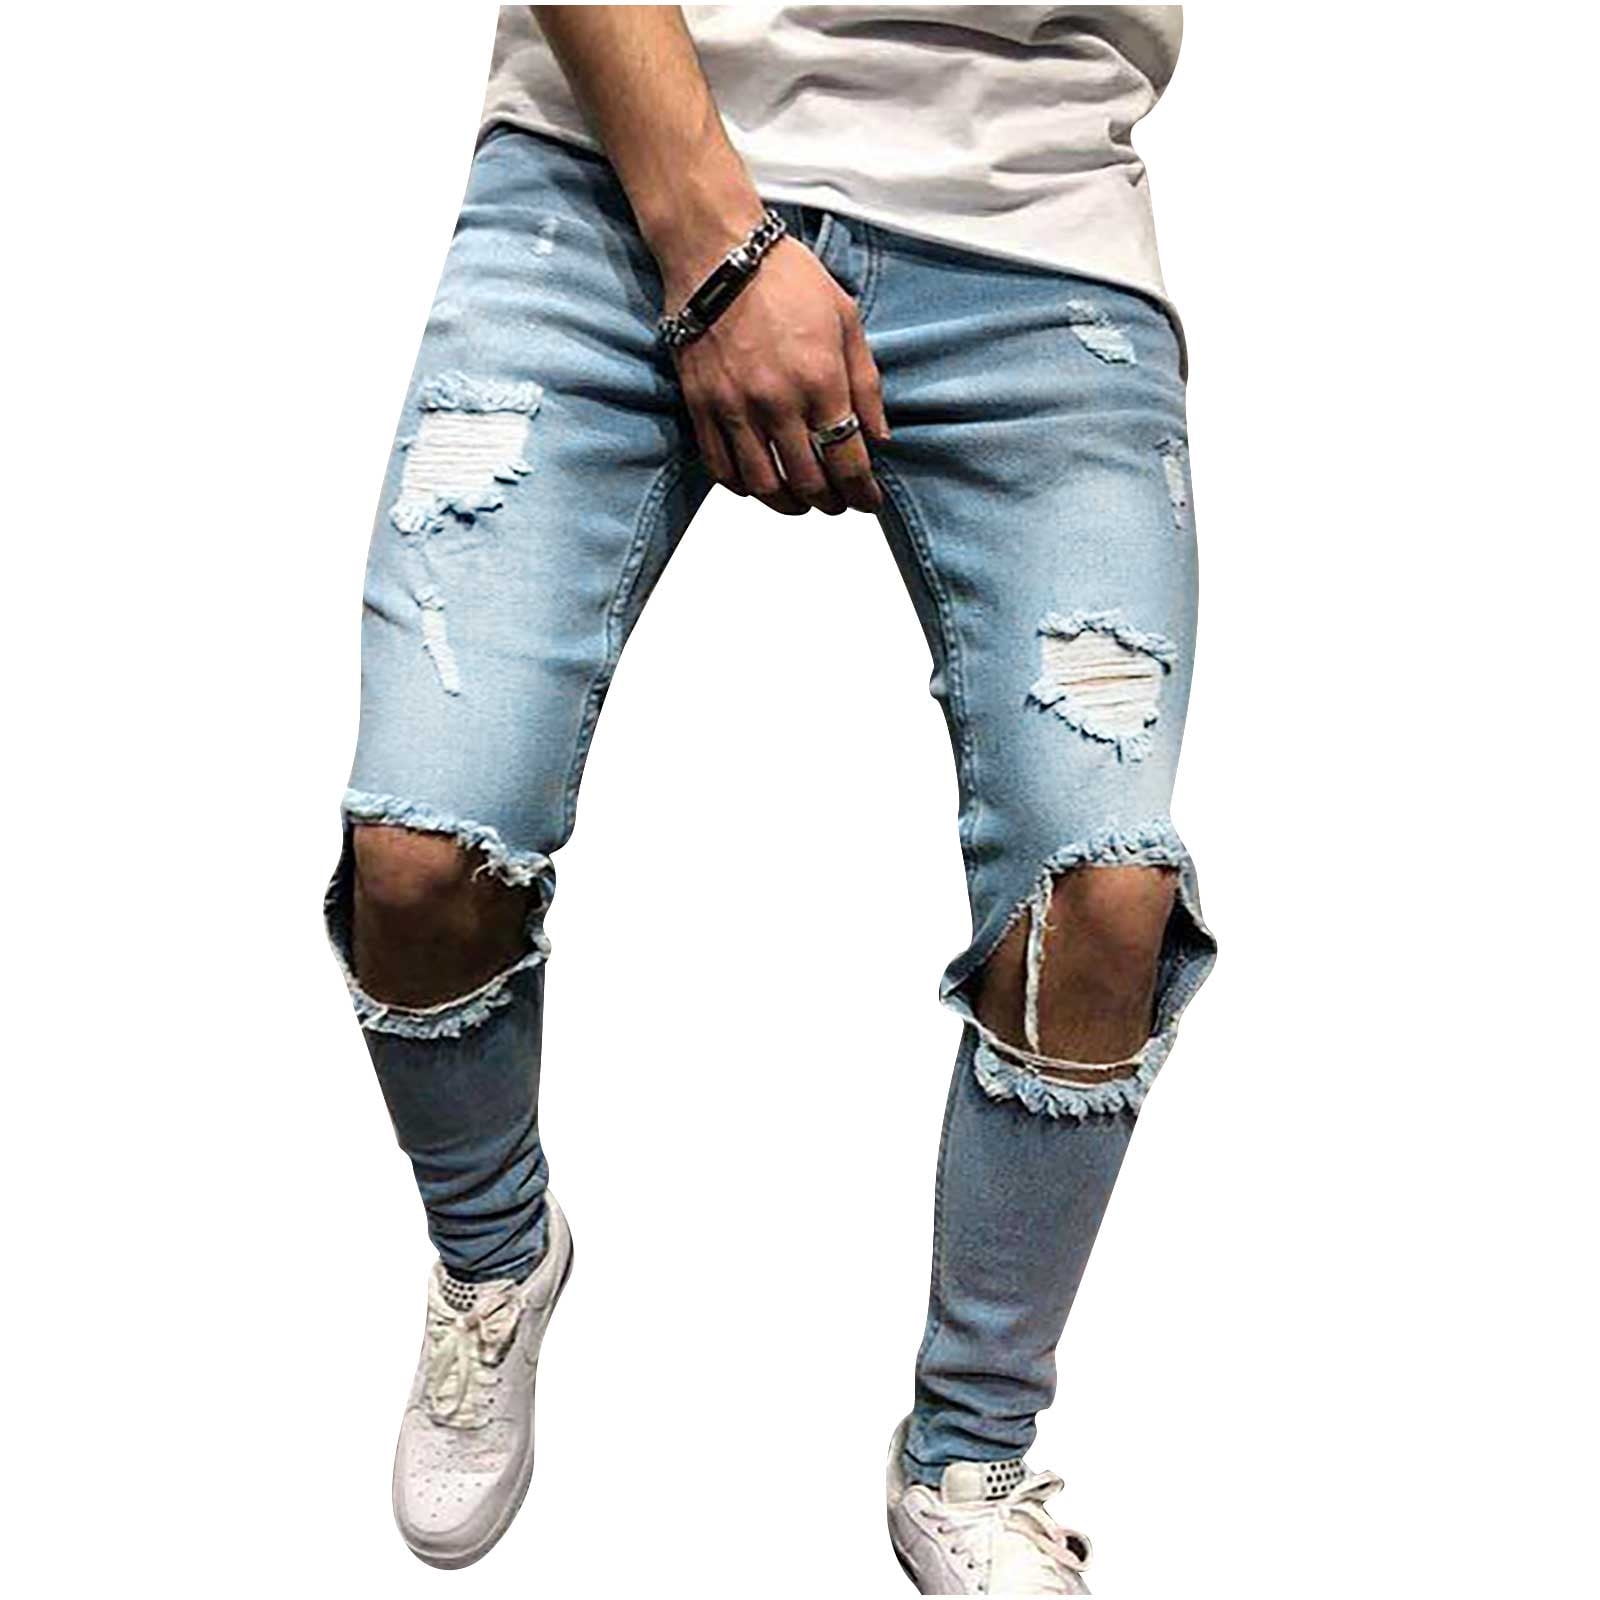 physically Bad mood Sticky XFLWAM Men's Ripped Jeans Slim Fit Stretch Distressed Jeans Pants for Men Light  Blue S - Walmart.com